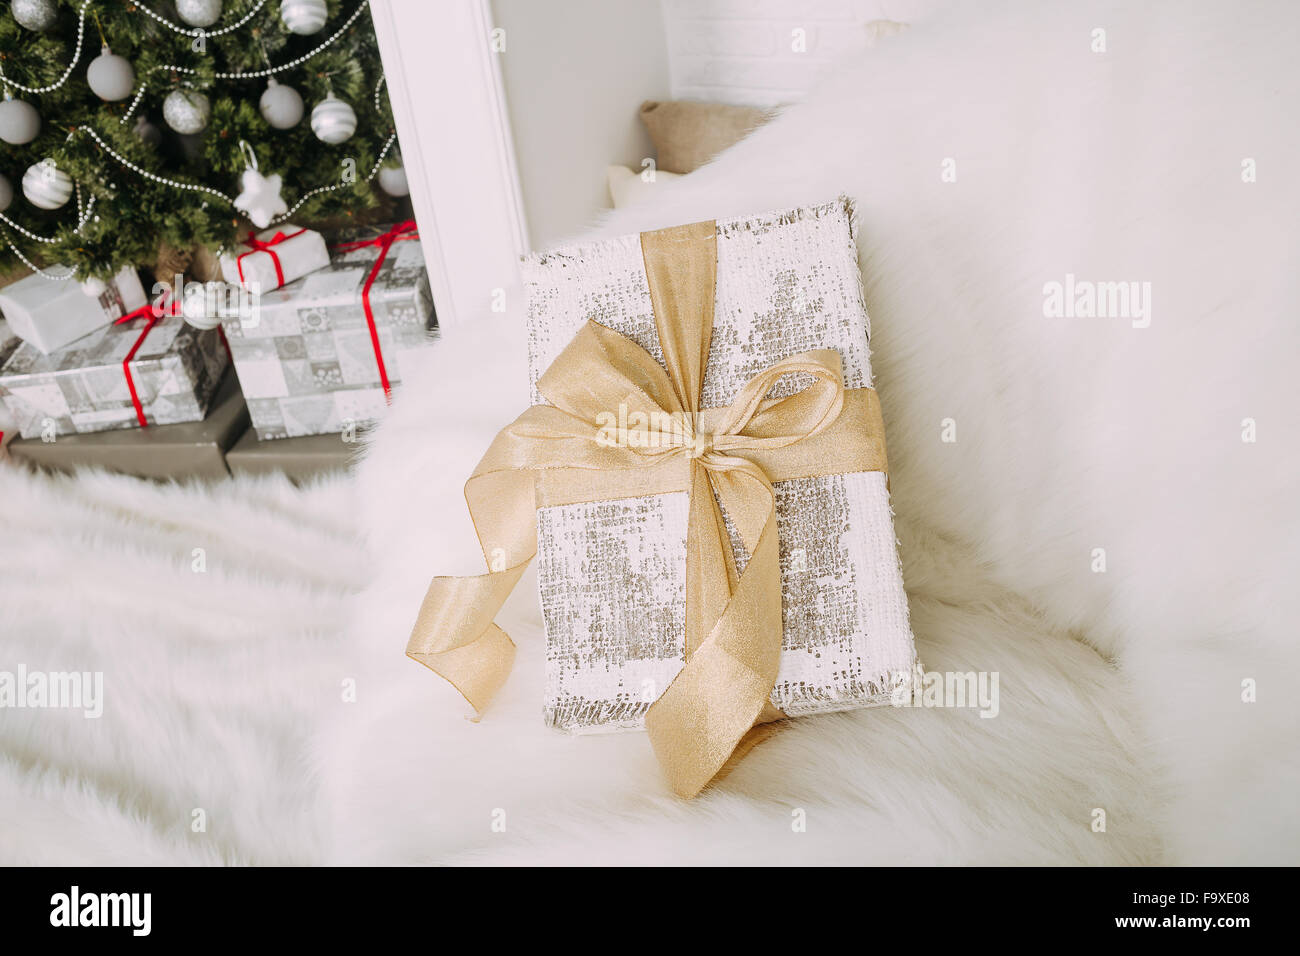 New Year's surprise on white fluffy chair Stock Photo